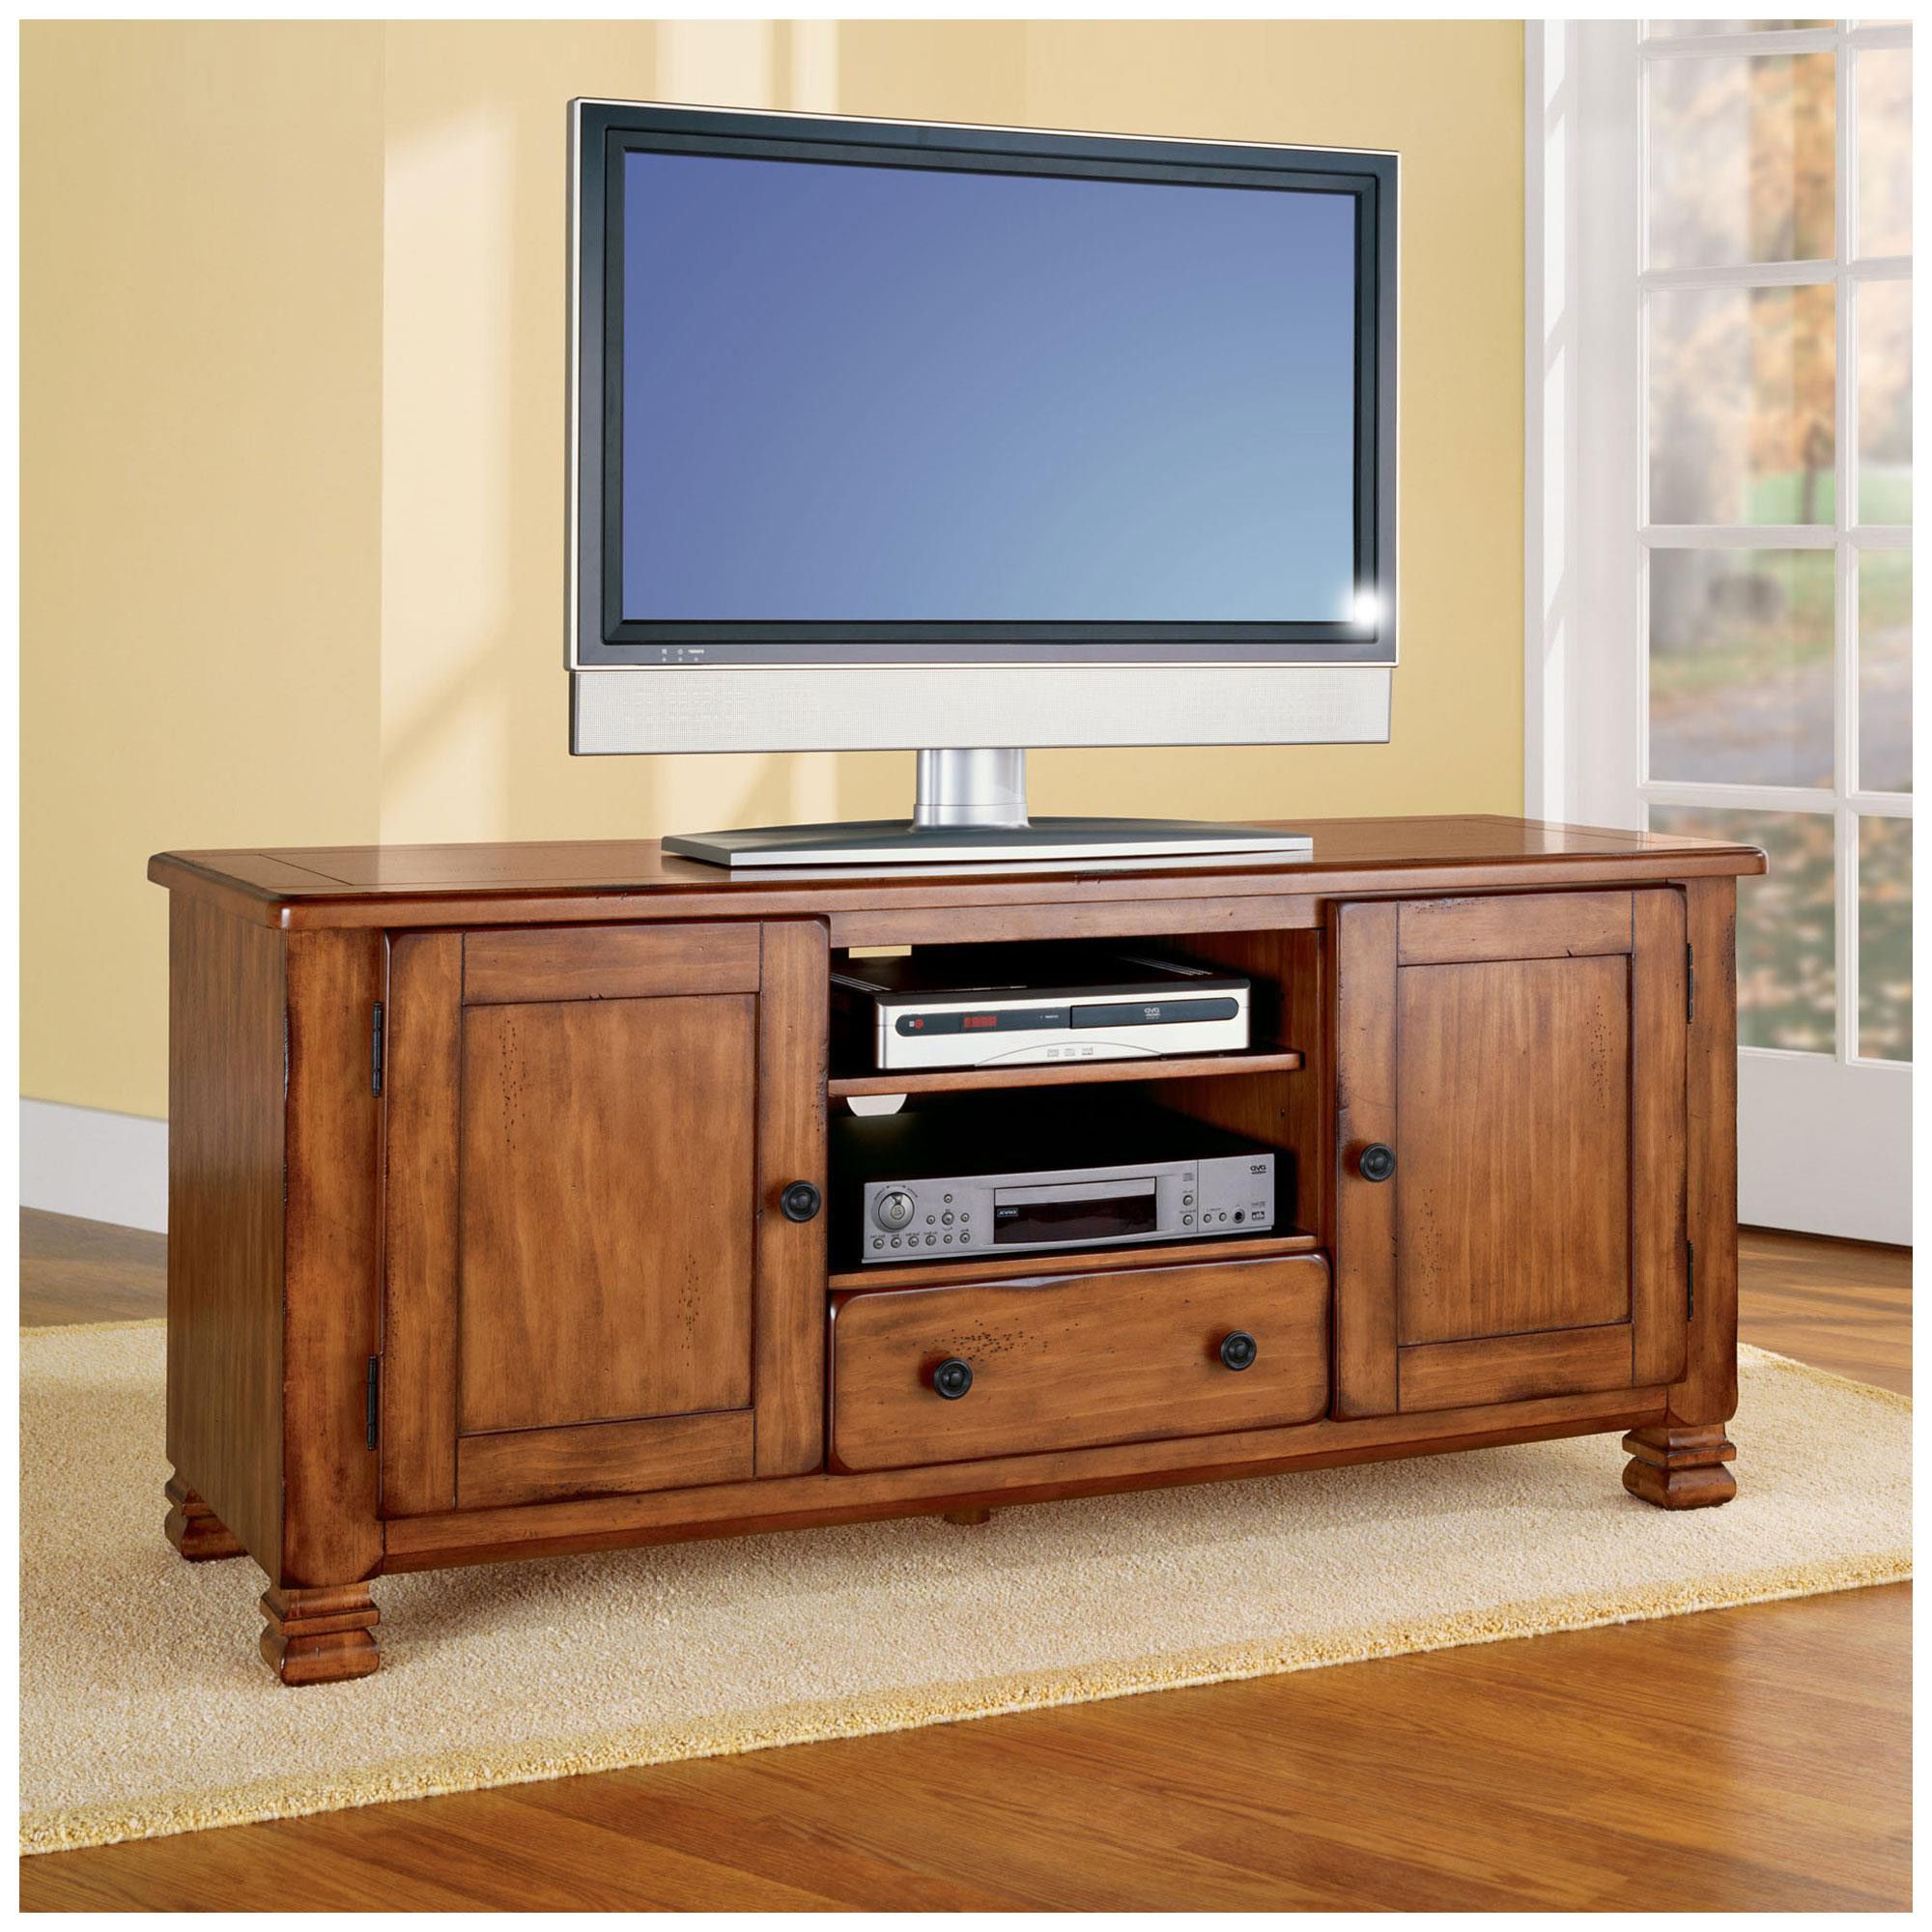 20 The Best Real Wood Corner Tv Stands